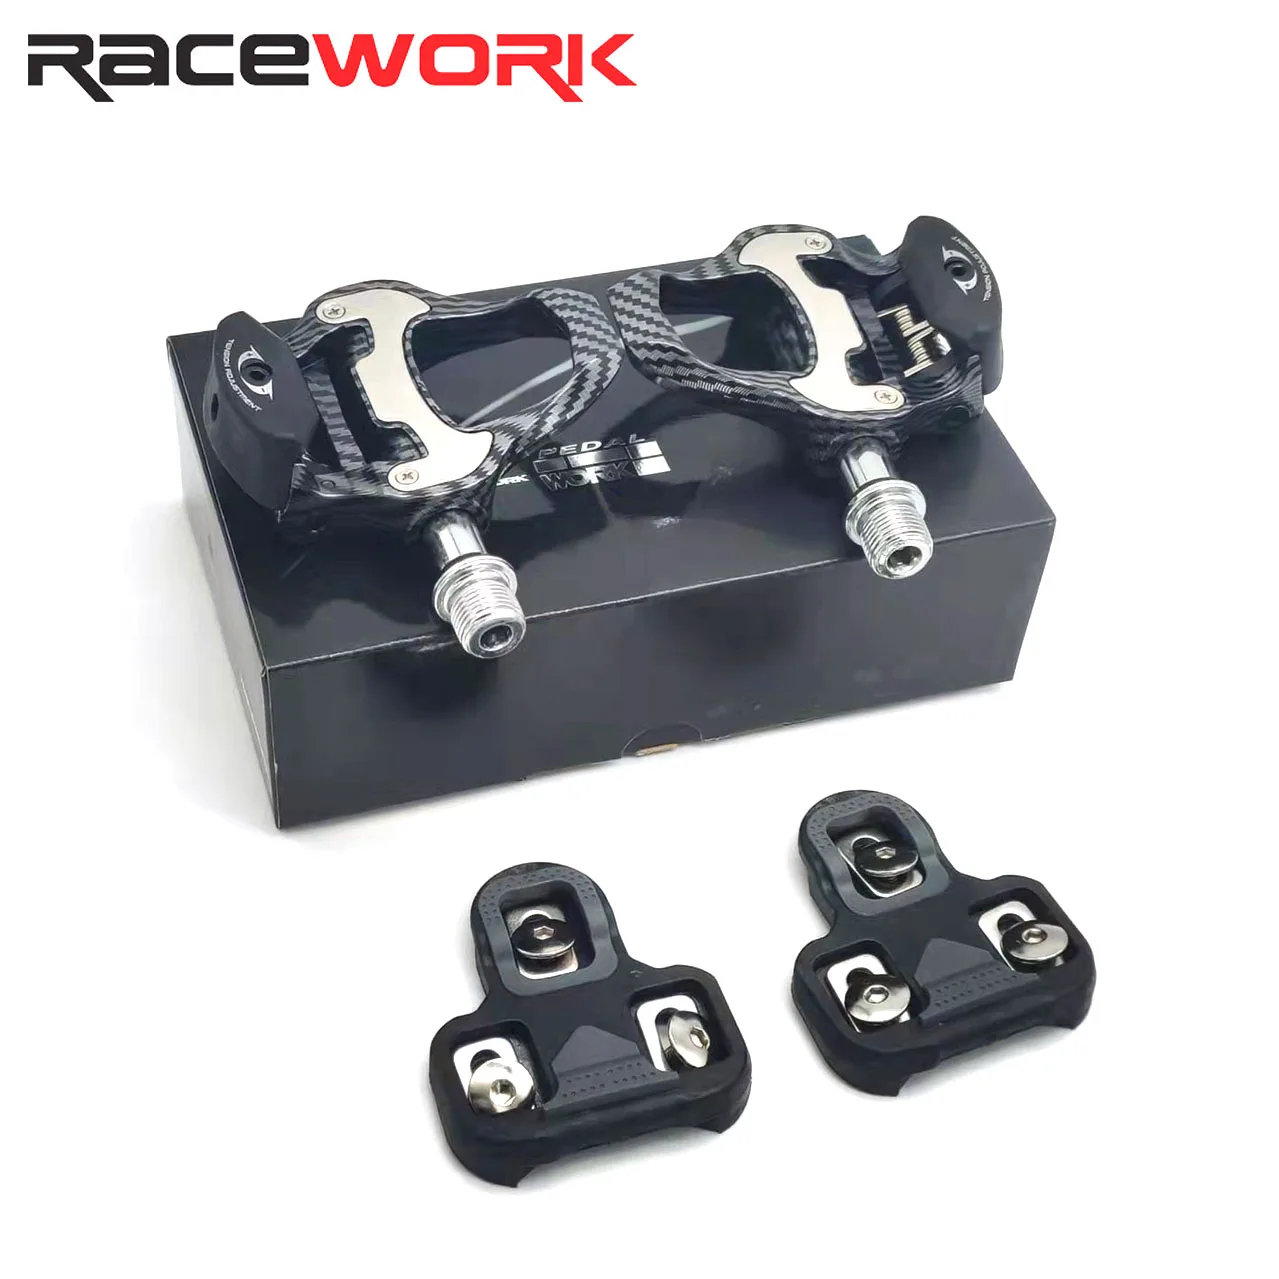 

RACEWORK Carbon Fiber Pattern Road Bike Pedal 4 Peilin UltraLight Pedal Suitable for Keo SPD Systems Self-locking Bicycle Pedals